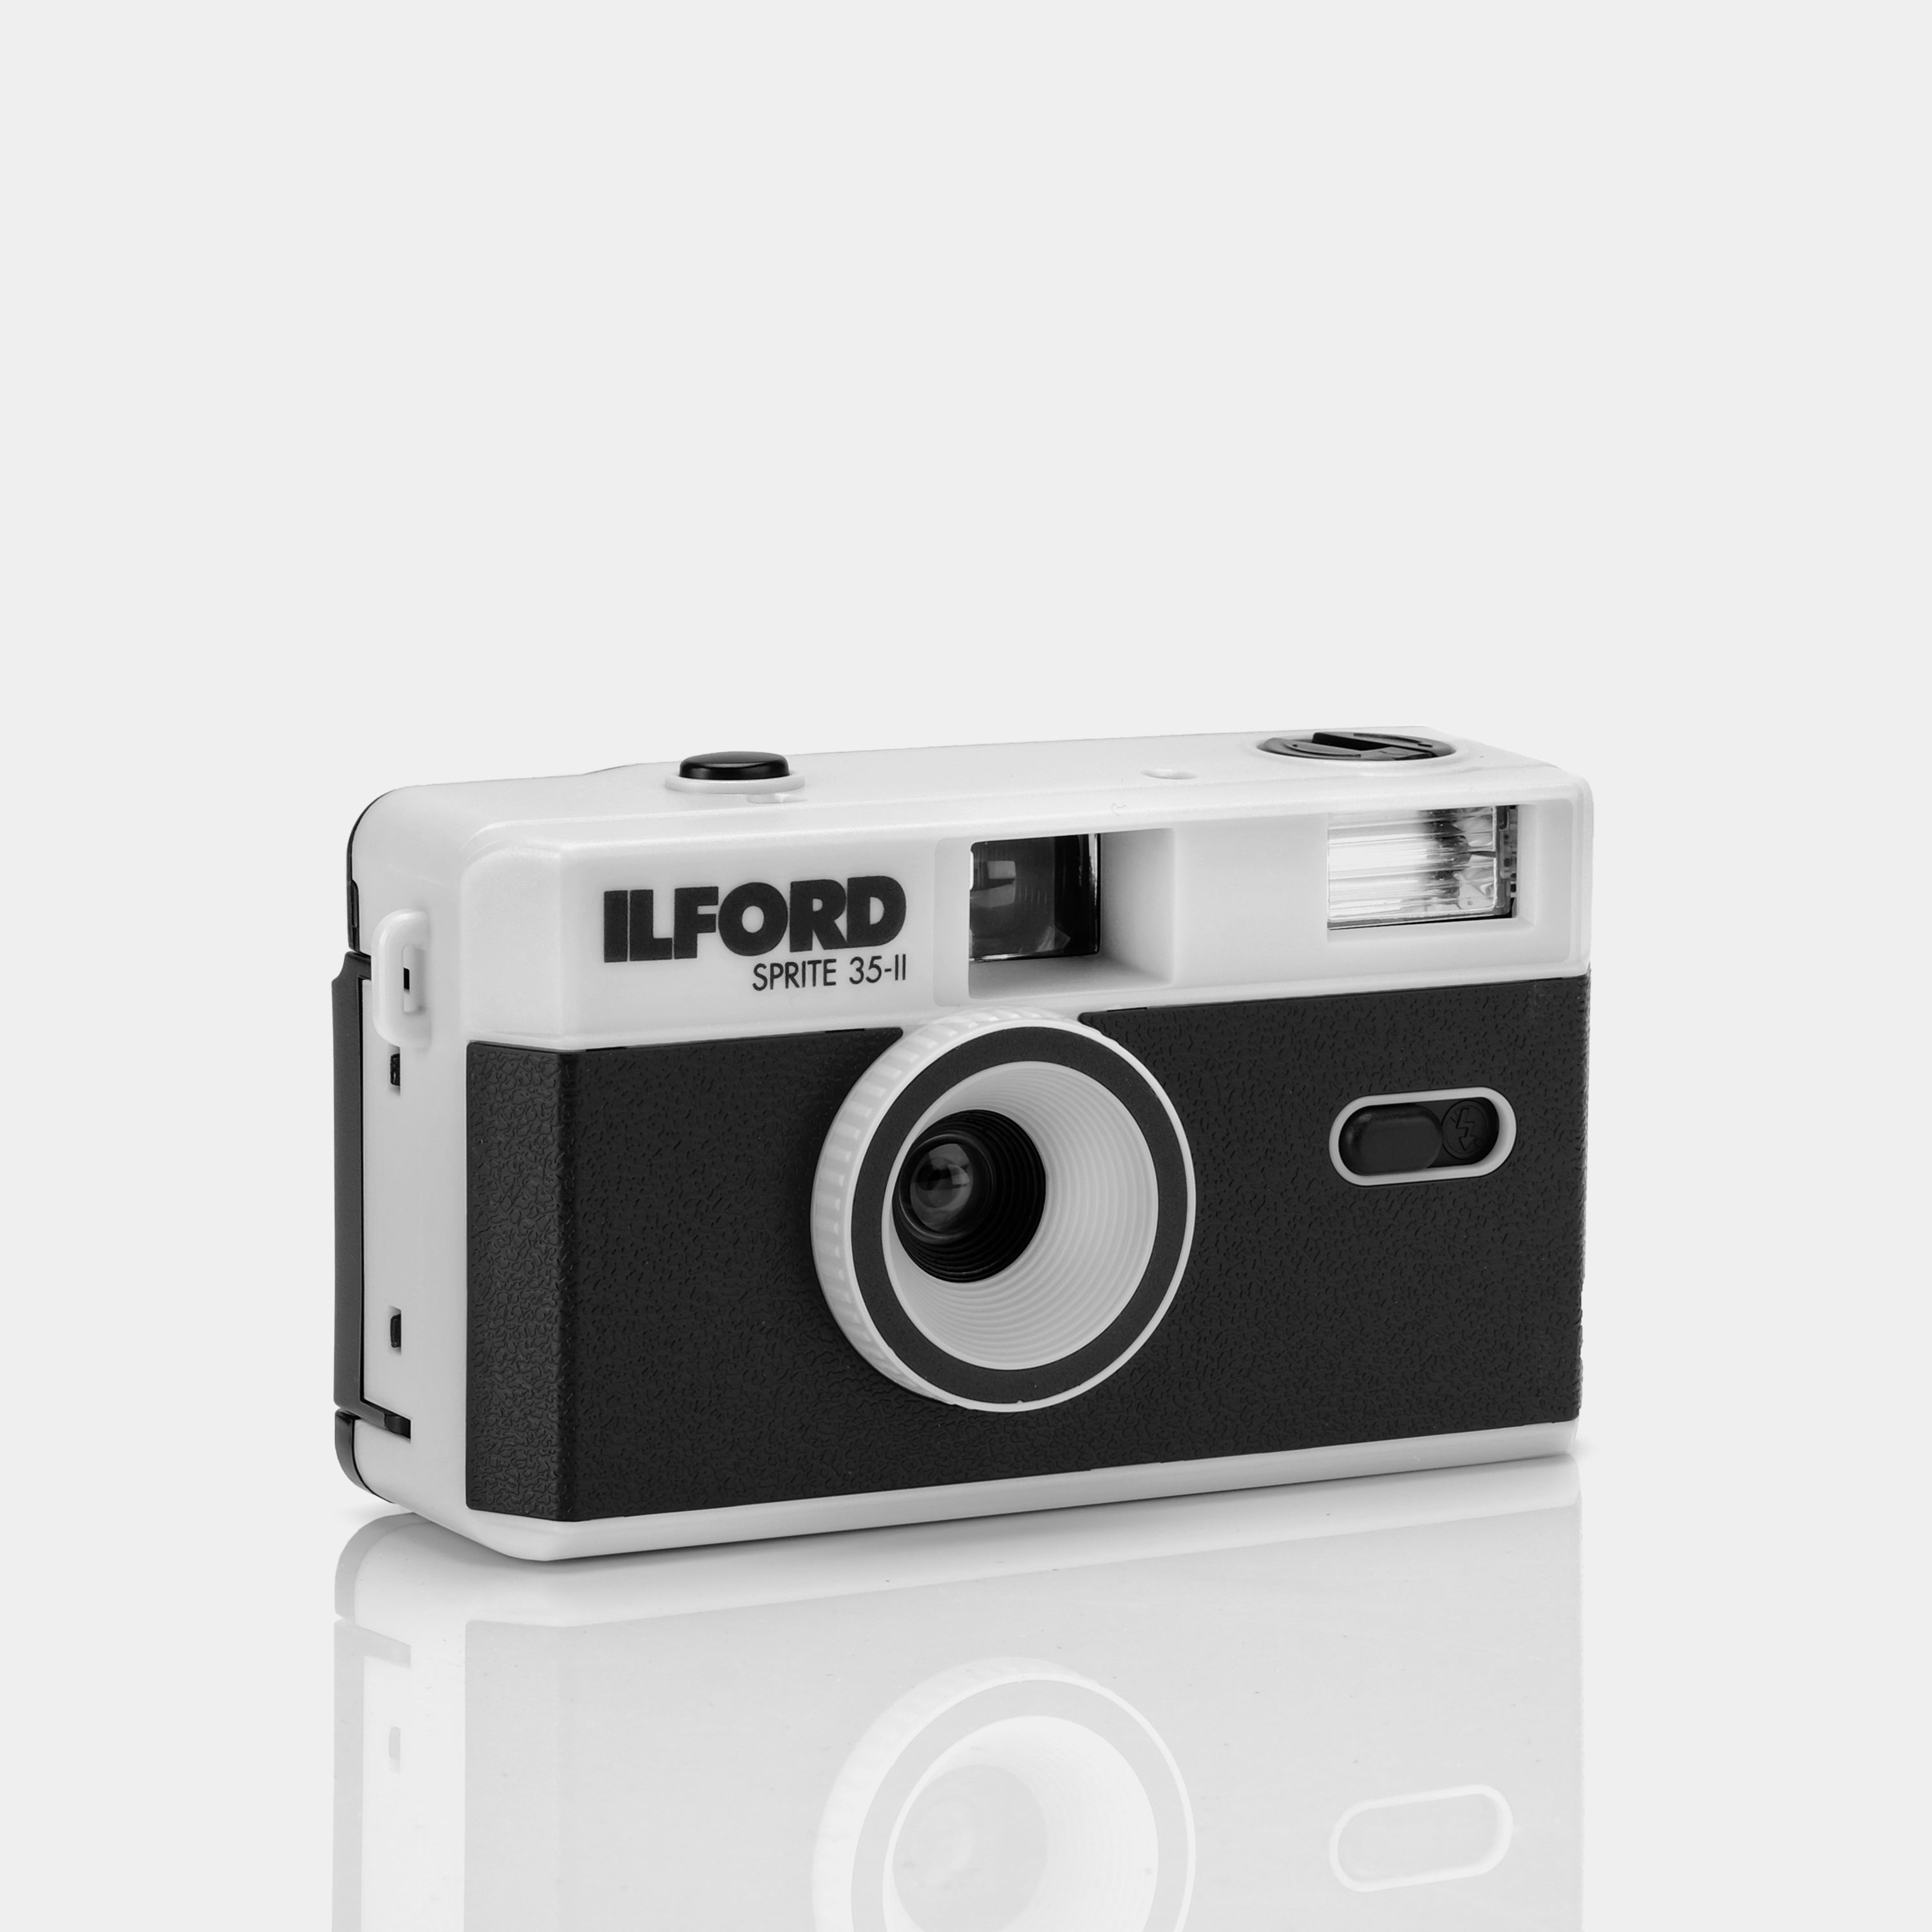 Ilford Sprite 35-II Reusable 35mm Point and Shoot Film Camera - Black & Silver